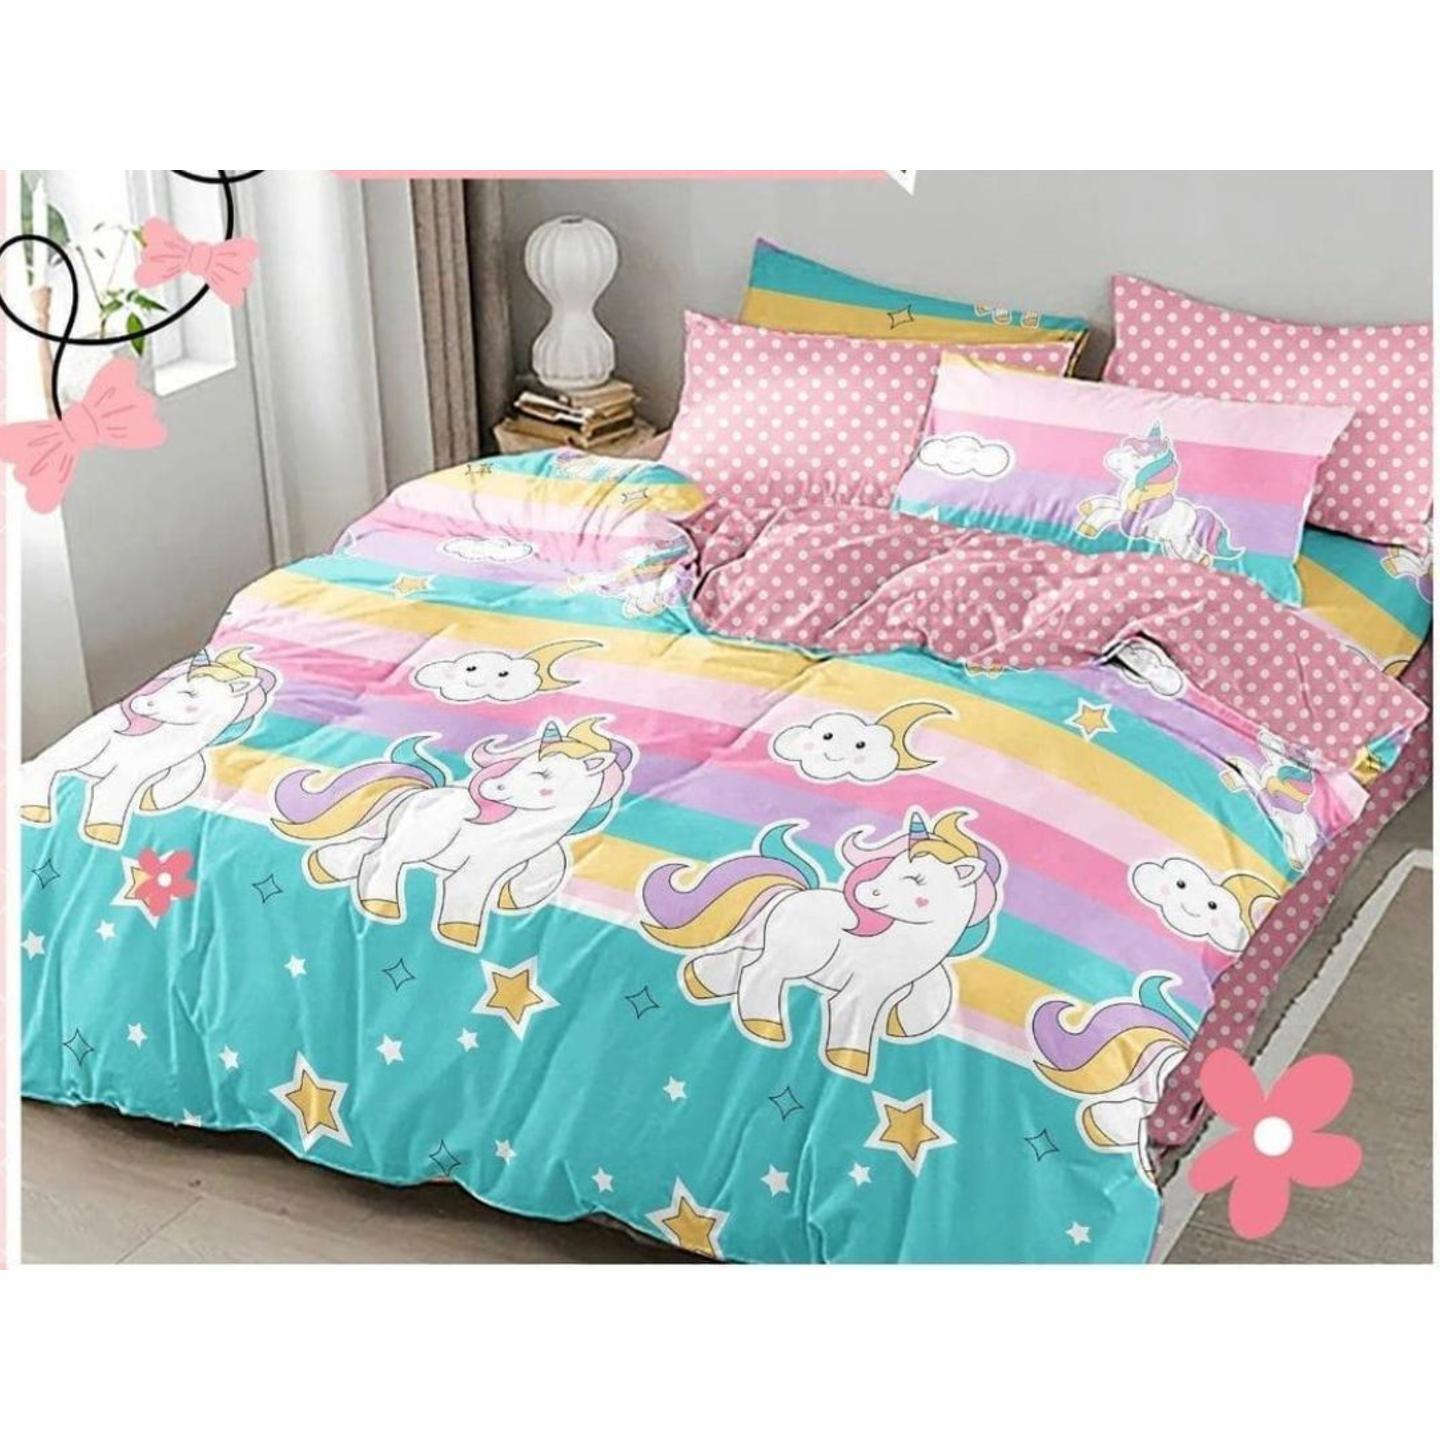 Handtex Home Glace Cotton Cartoon Printed Bedsheet with 2 Pillow Cover for Kids 90x100 Inch